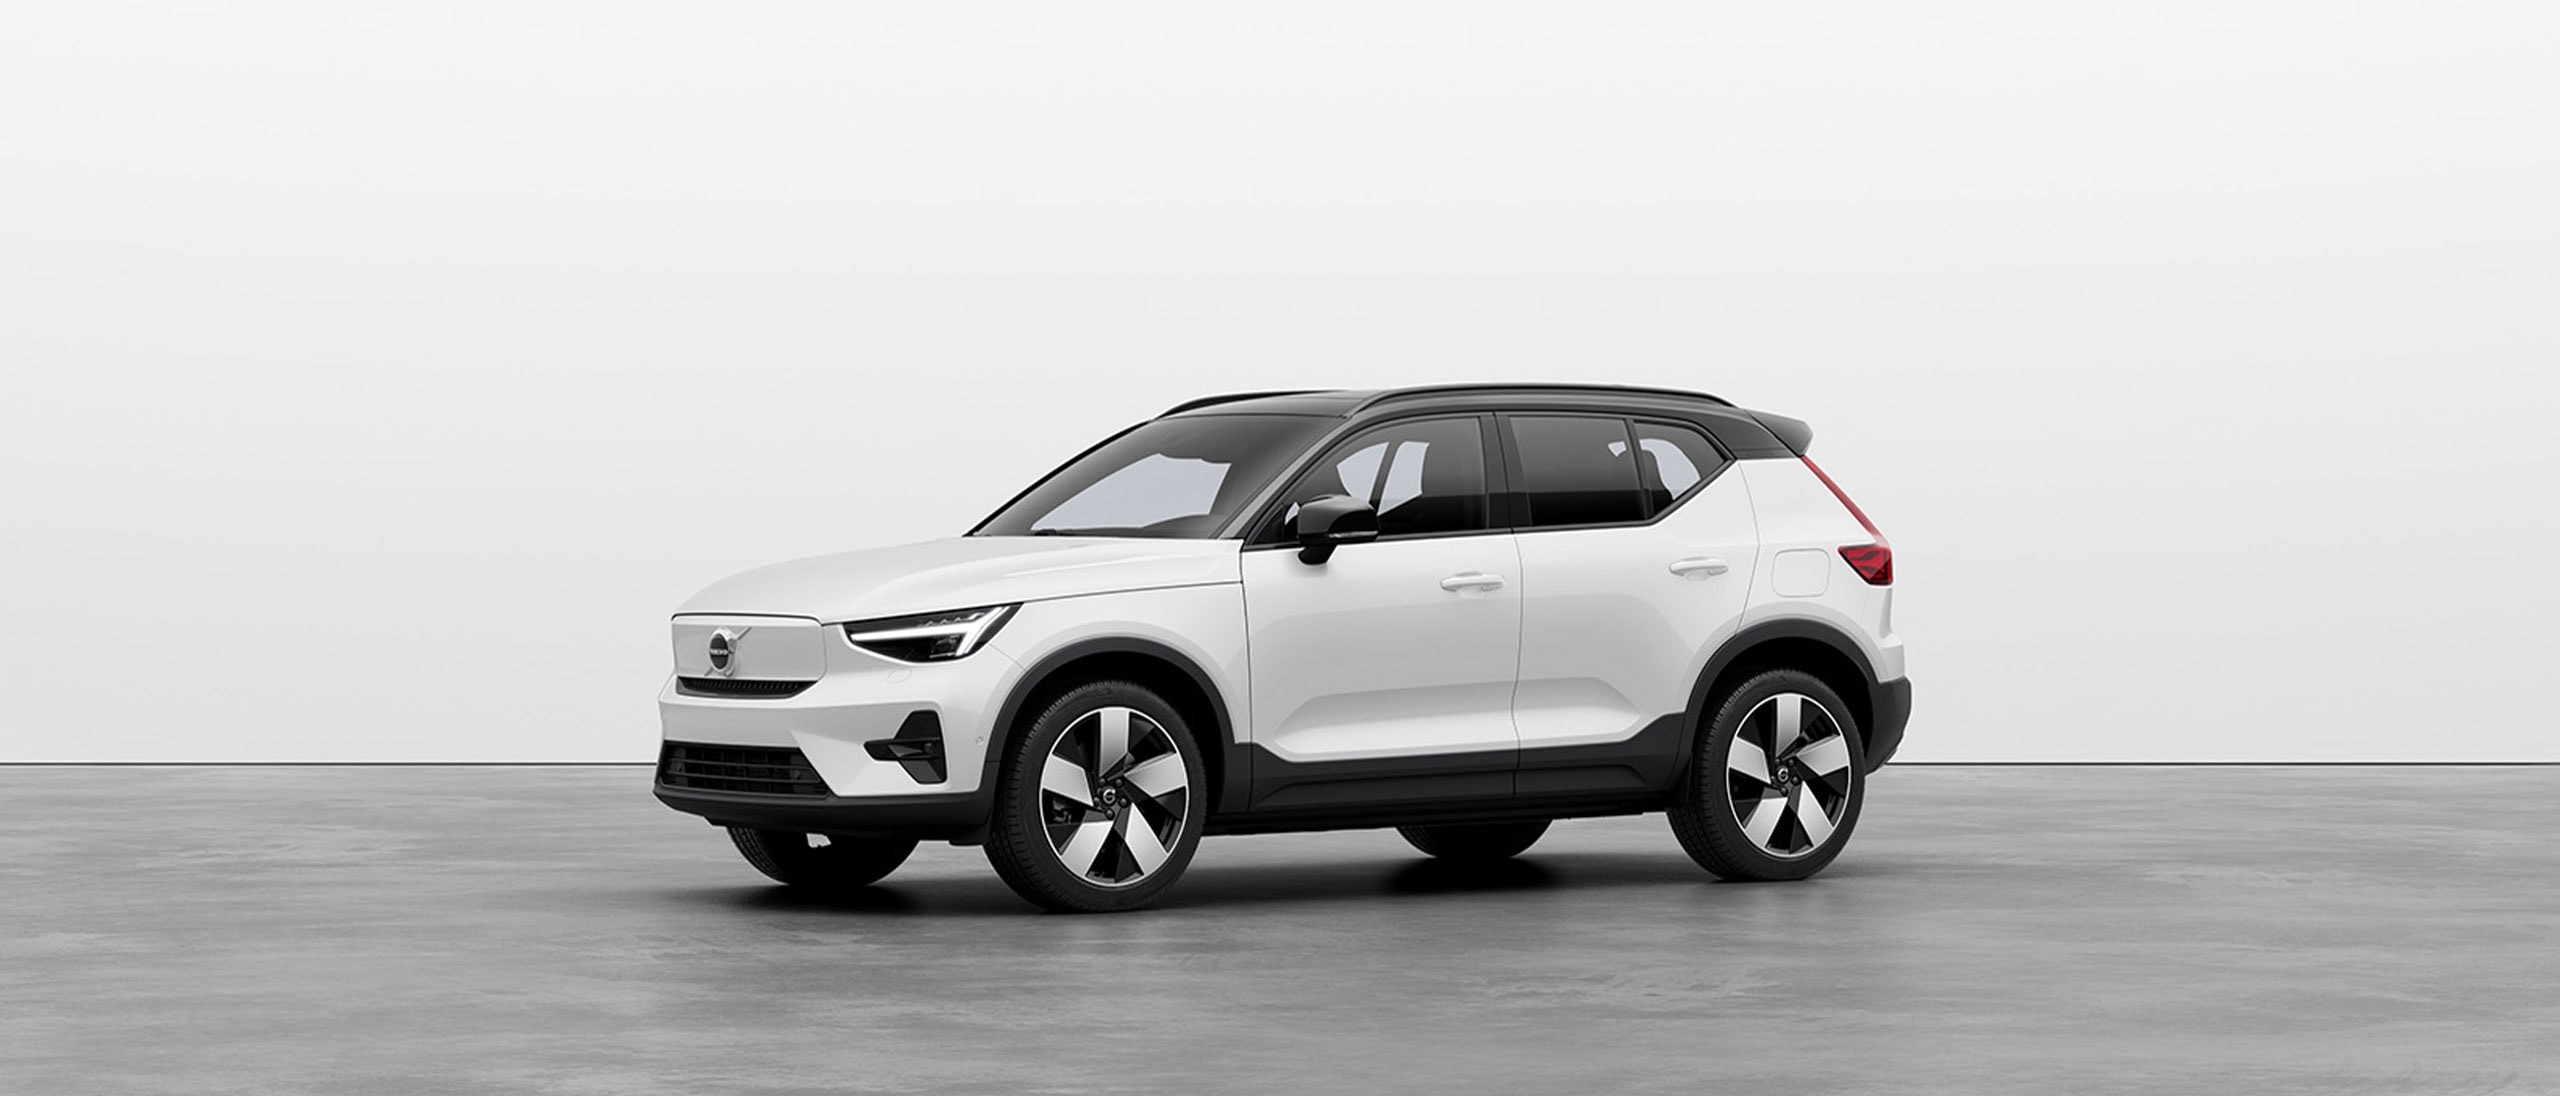 XC40 Recharge pure electric specifications Volvo Cars